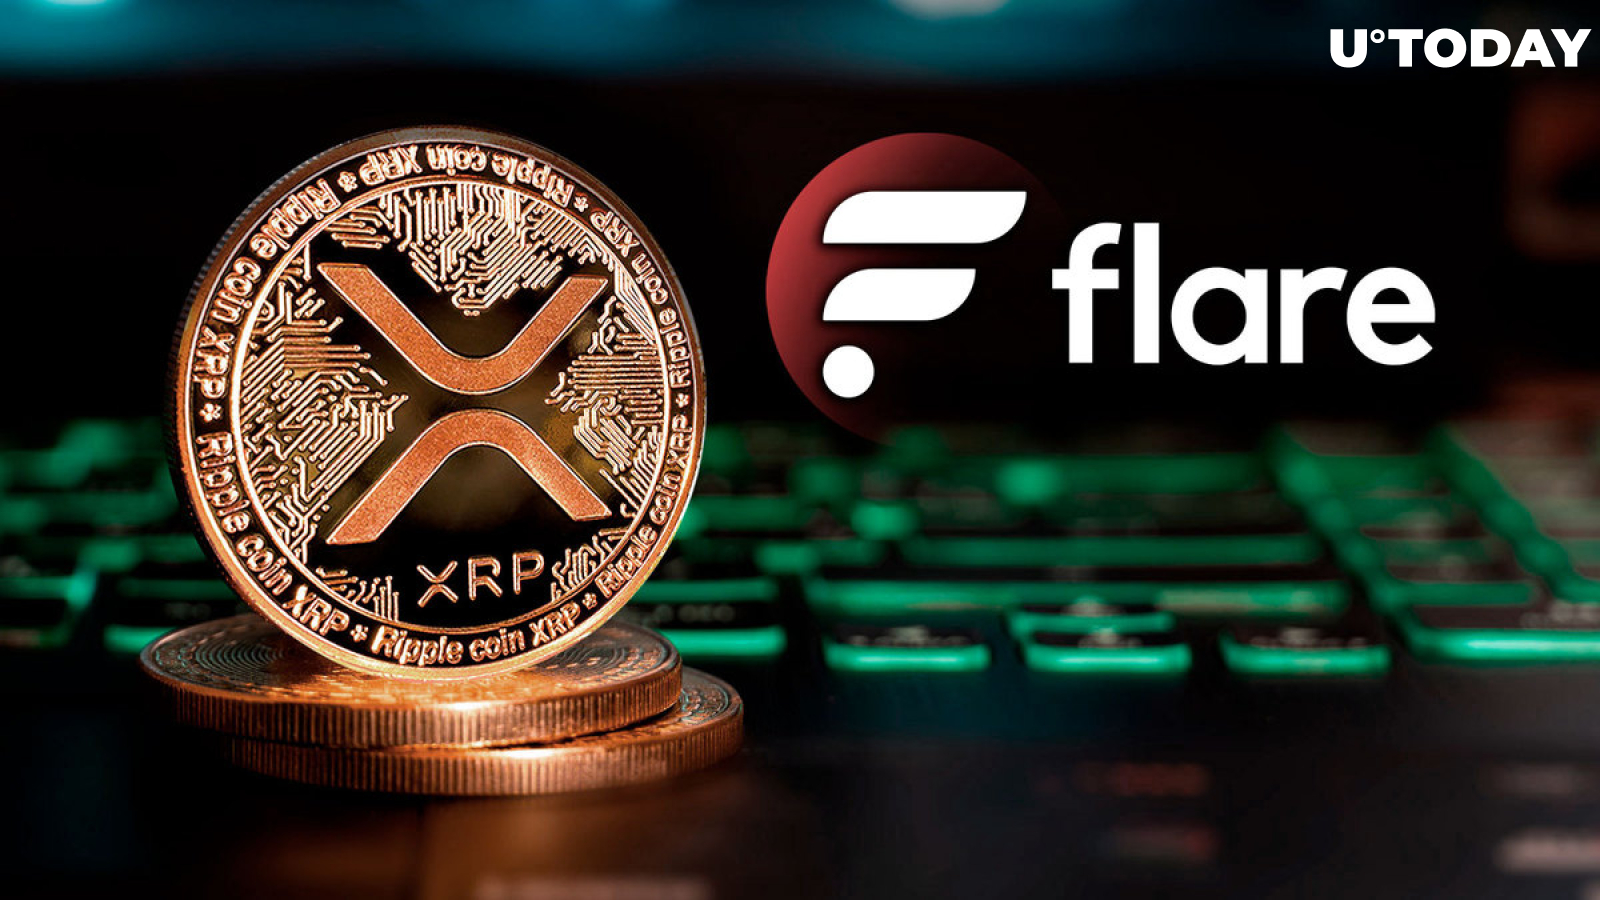 XRP Community Disappointed About Its Performance, Flare CEO Weighs In